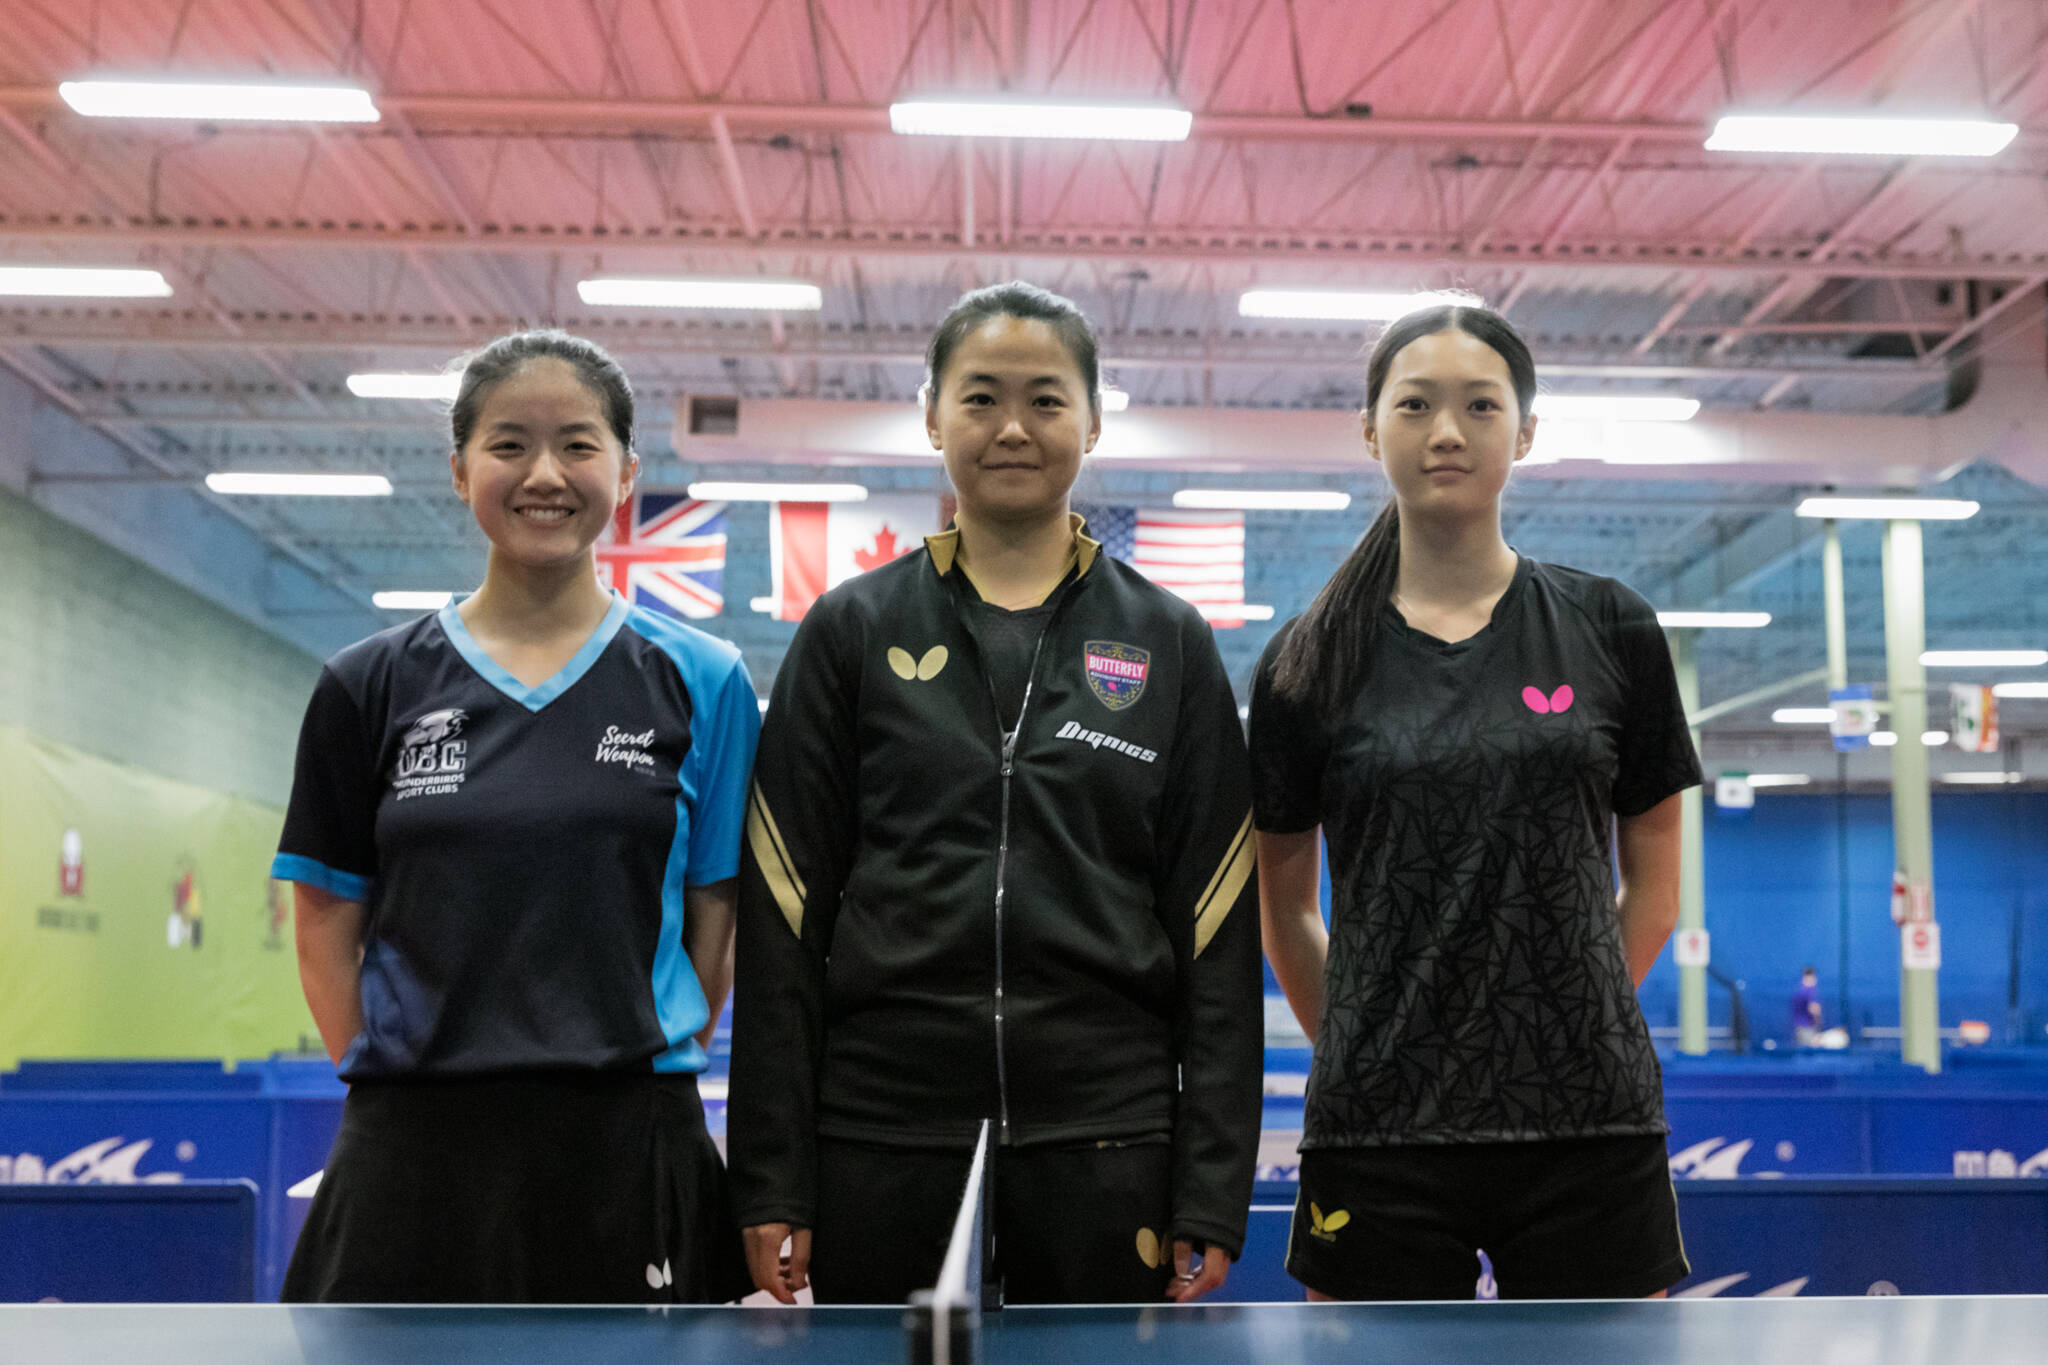 Two B.C. table tennis stars, Ivy Liao (left) and Mo Zhang (centre) will represent Canada in the Santiago 2023 Pan American Games which will take place from Oct. 29 to Nov. 5 at the Centro de Entrenamiento Olímpico. (Photo courtesy Thorsten Gohl, vice president of Table Tennis Canada)